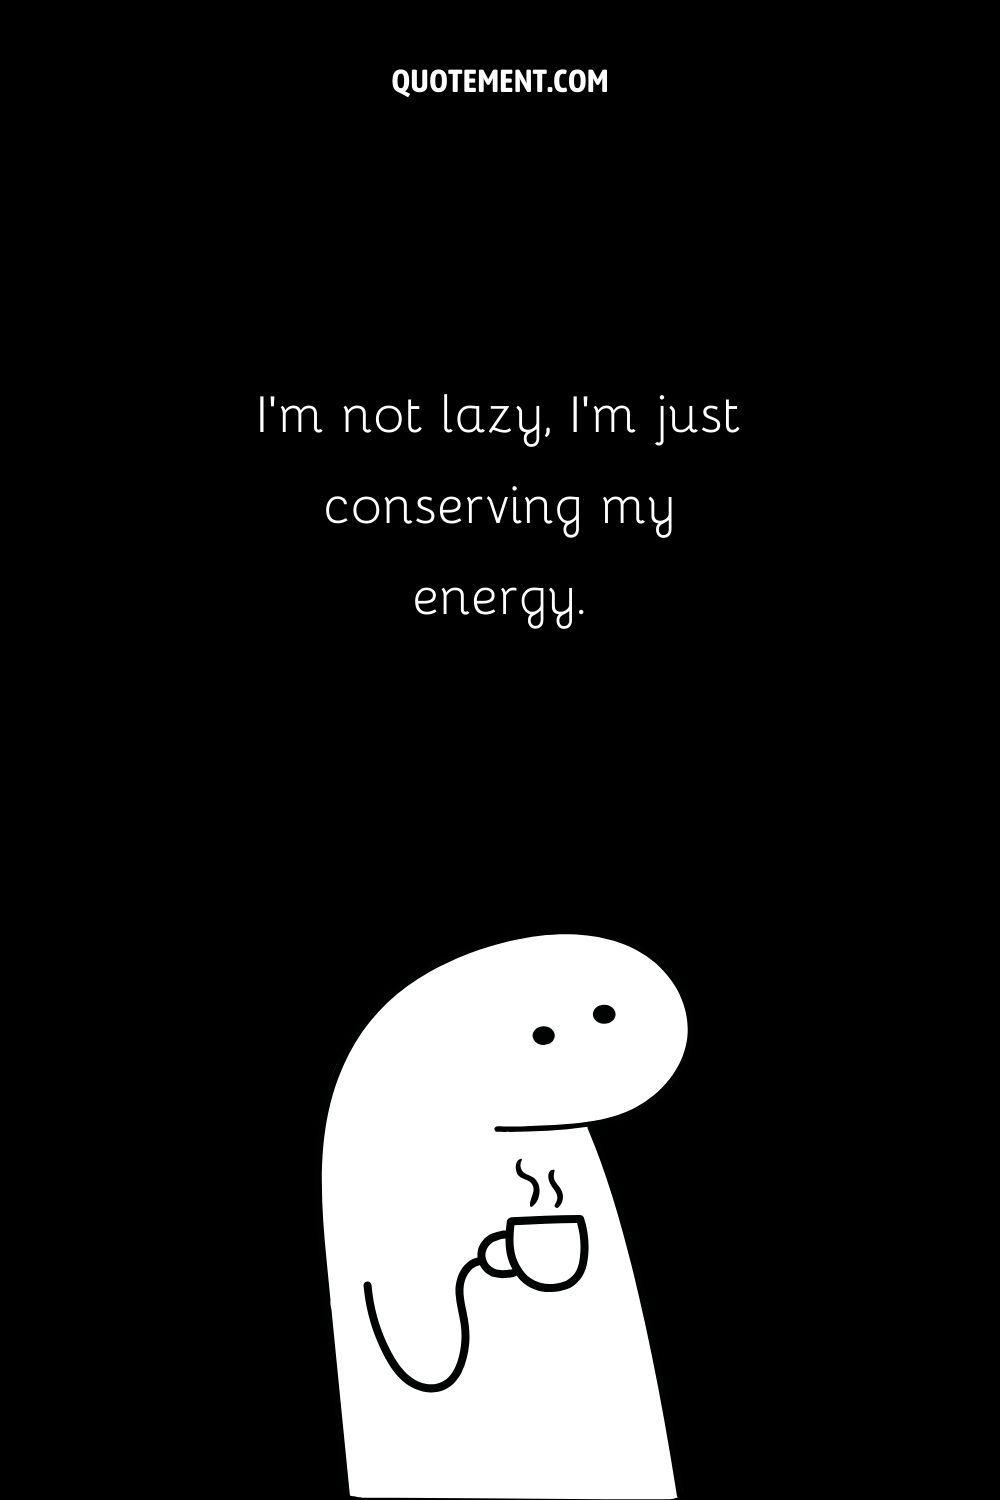 I’m not lazy, I’m just conserving my energy.